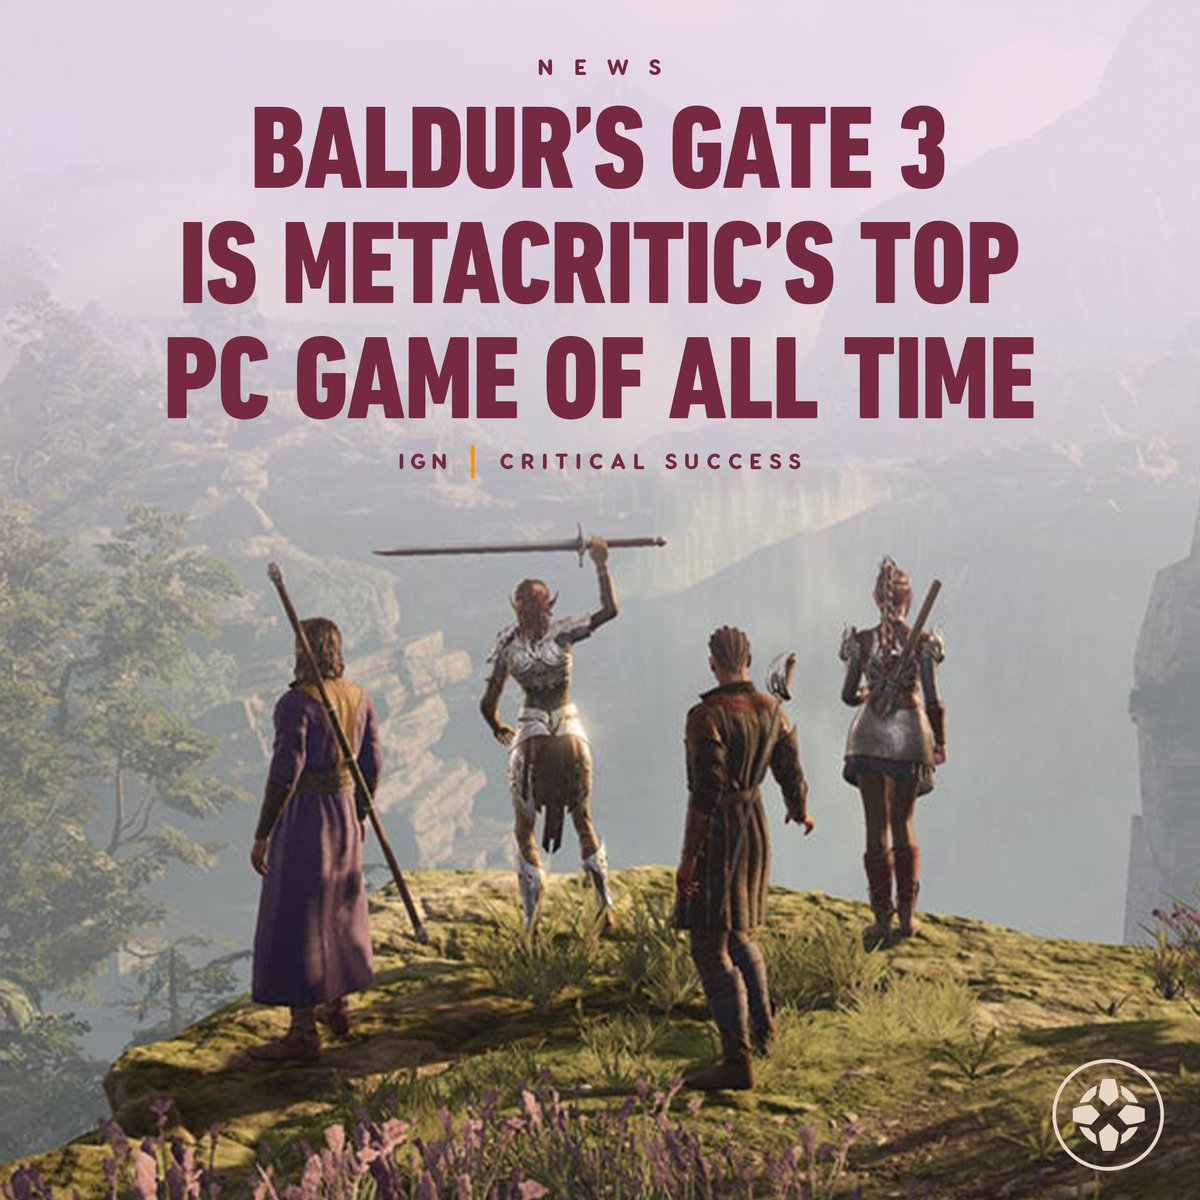 metacritic - The Best-Reviewed PC Games of All Time: #2 - Baldur's